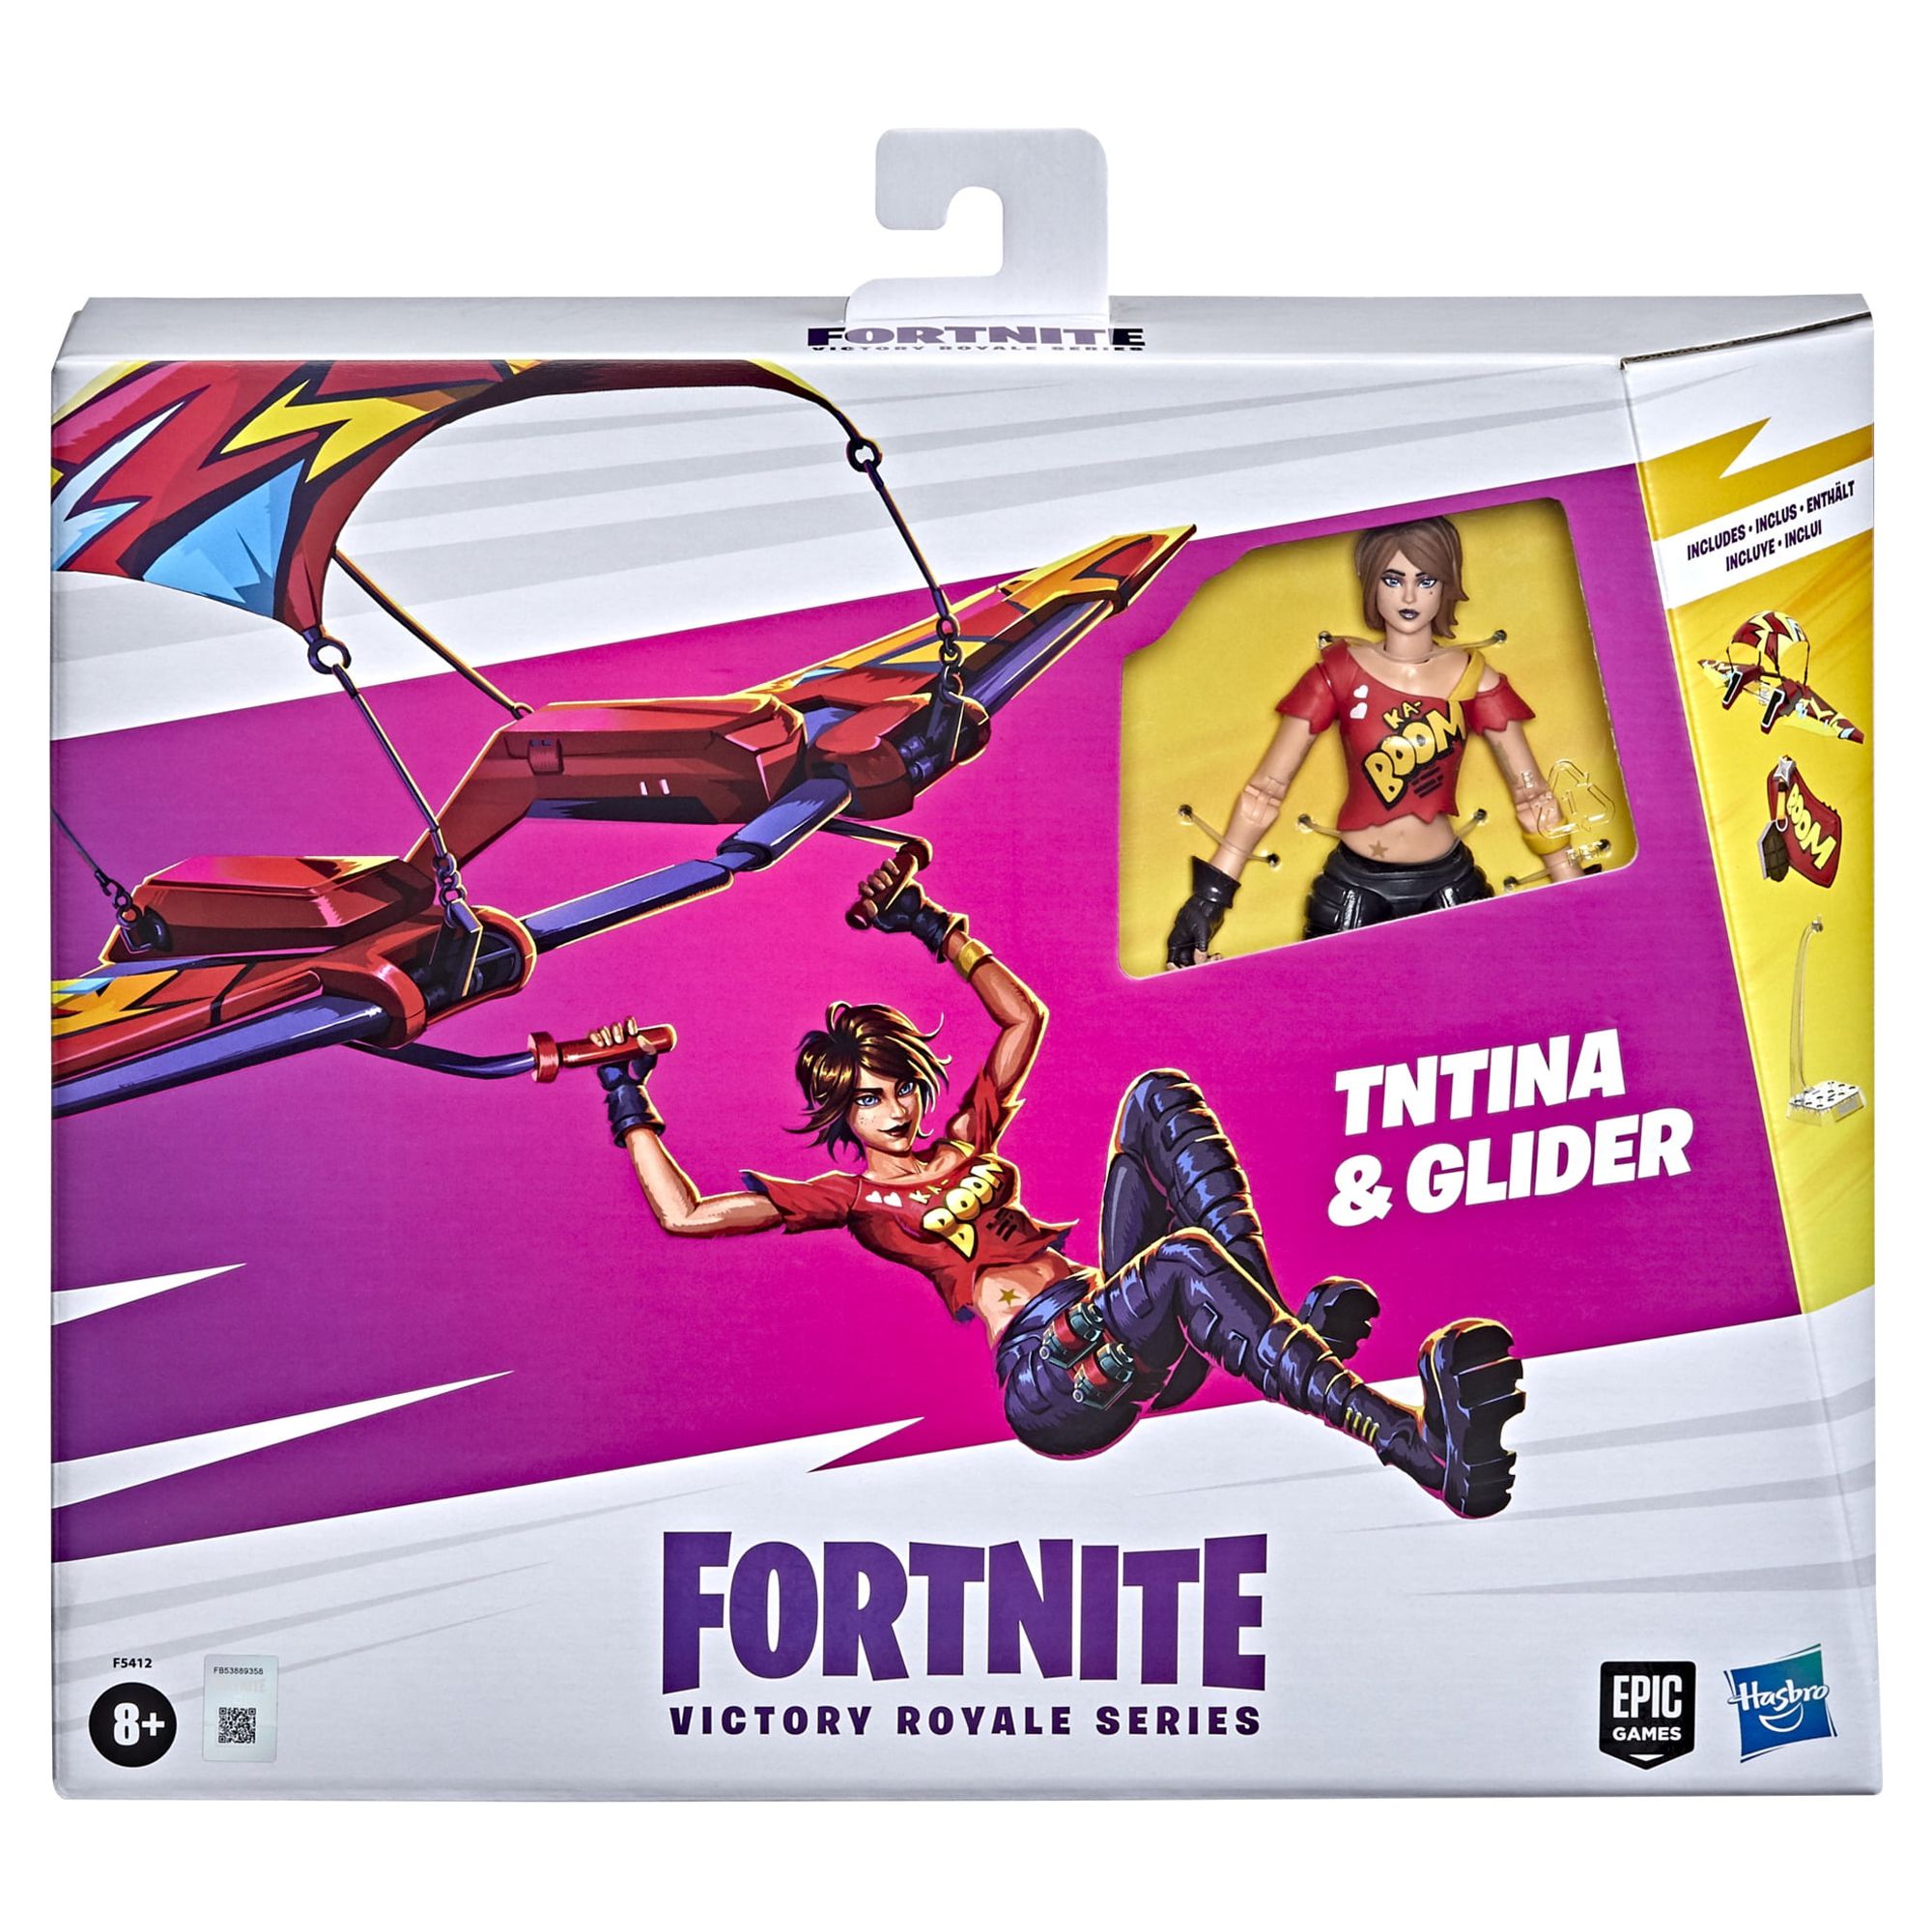 Fortnite: Victory Royale Series TNTina with glider Collectible Kids Toy Action Figure for Boys and Girls Ages 8 9 10 11 12 and Up - image 4 of 5